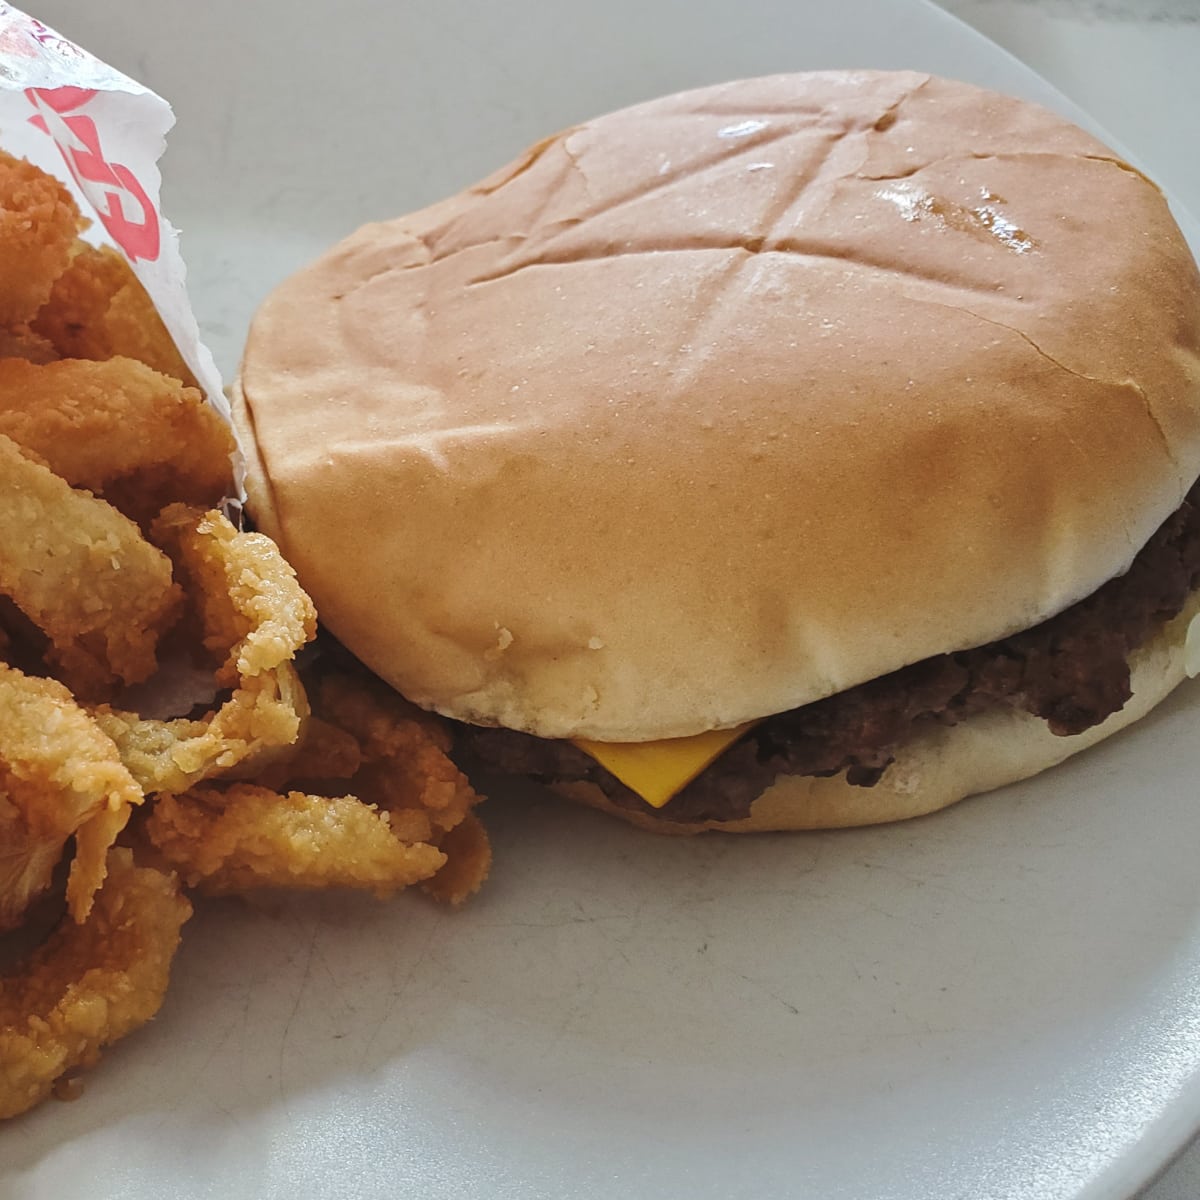 Big Boy Burger and onion rings from Paul's Drive-In in South Kansas City.